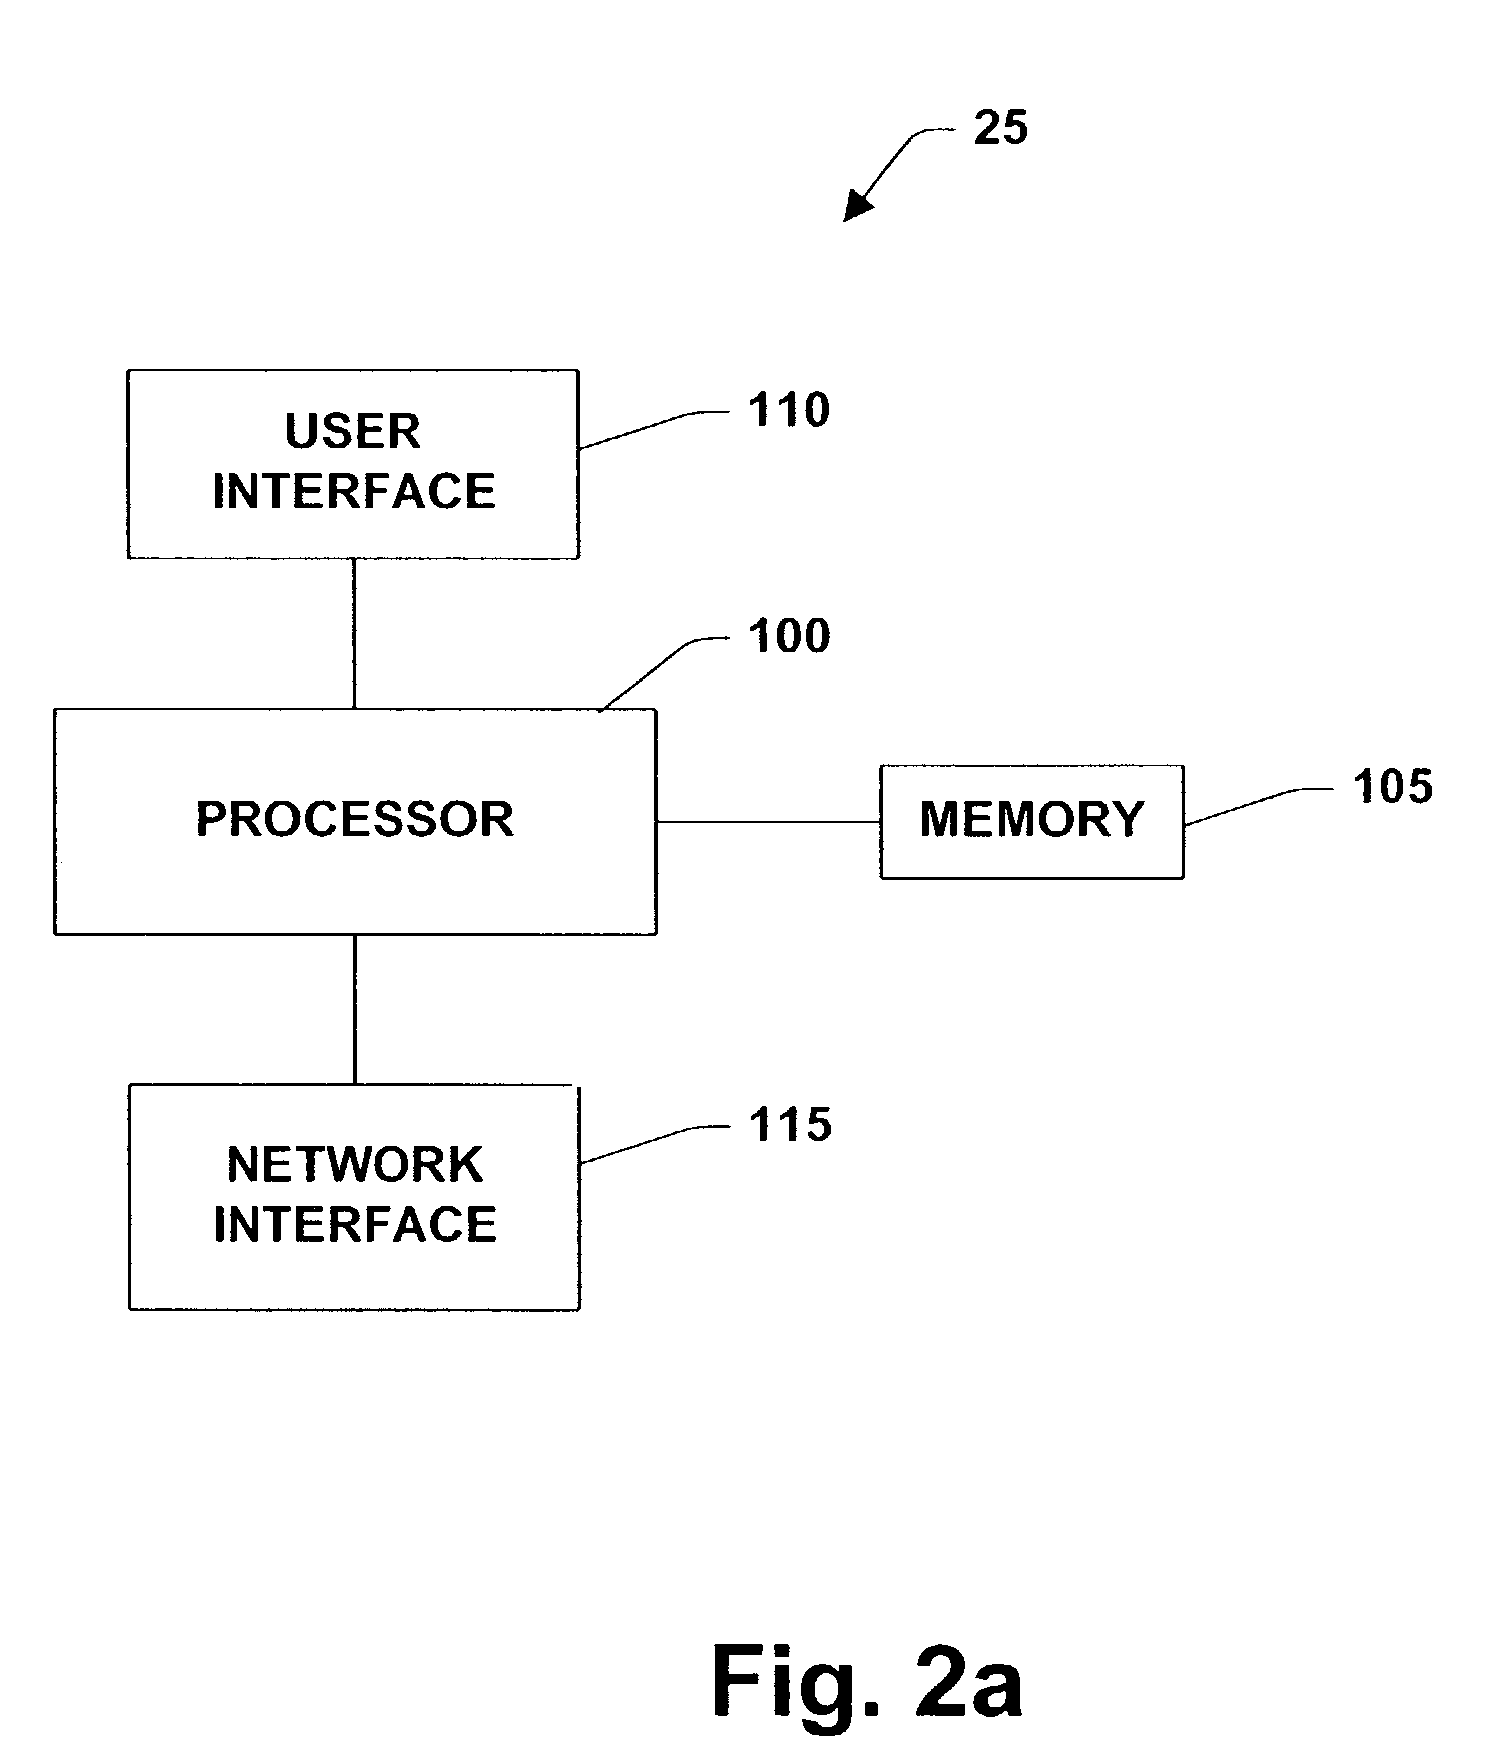 Method and system for configuring a set of information including a price and volume schedule for a product